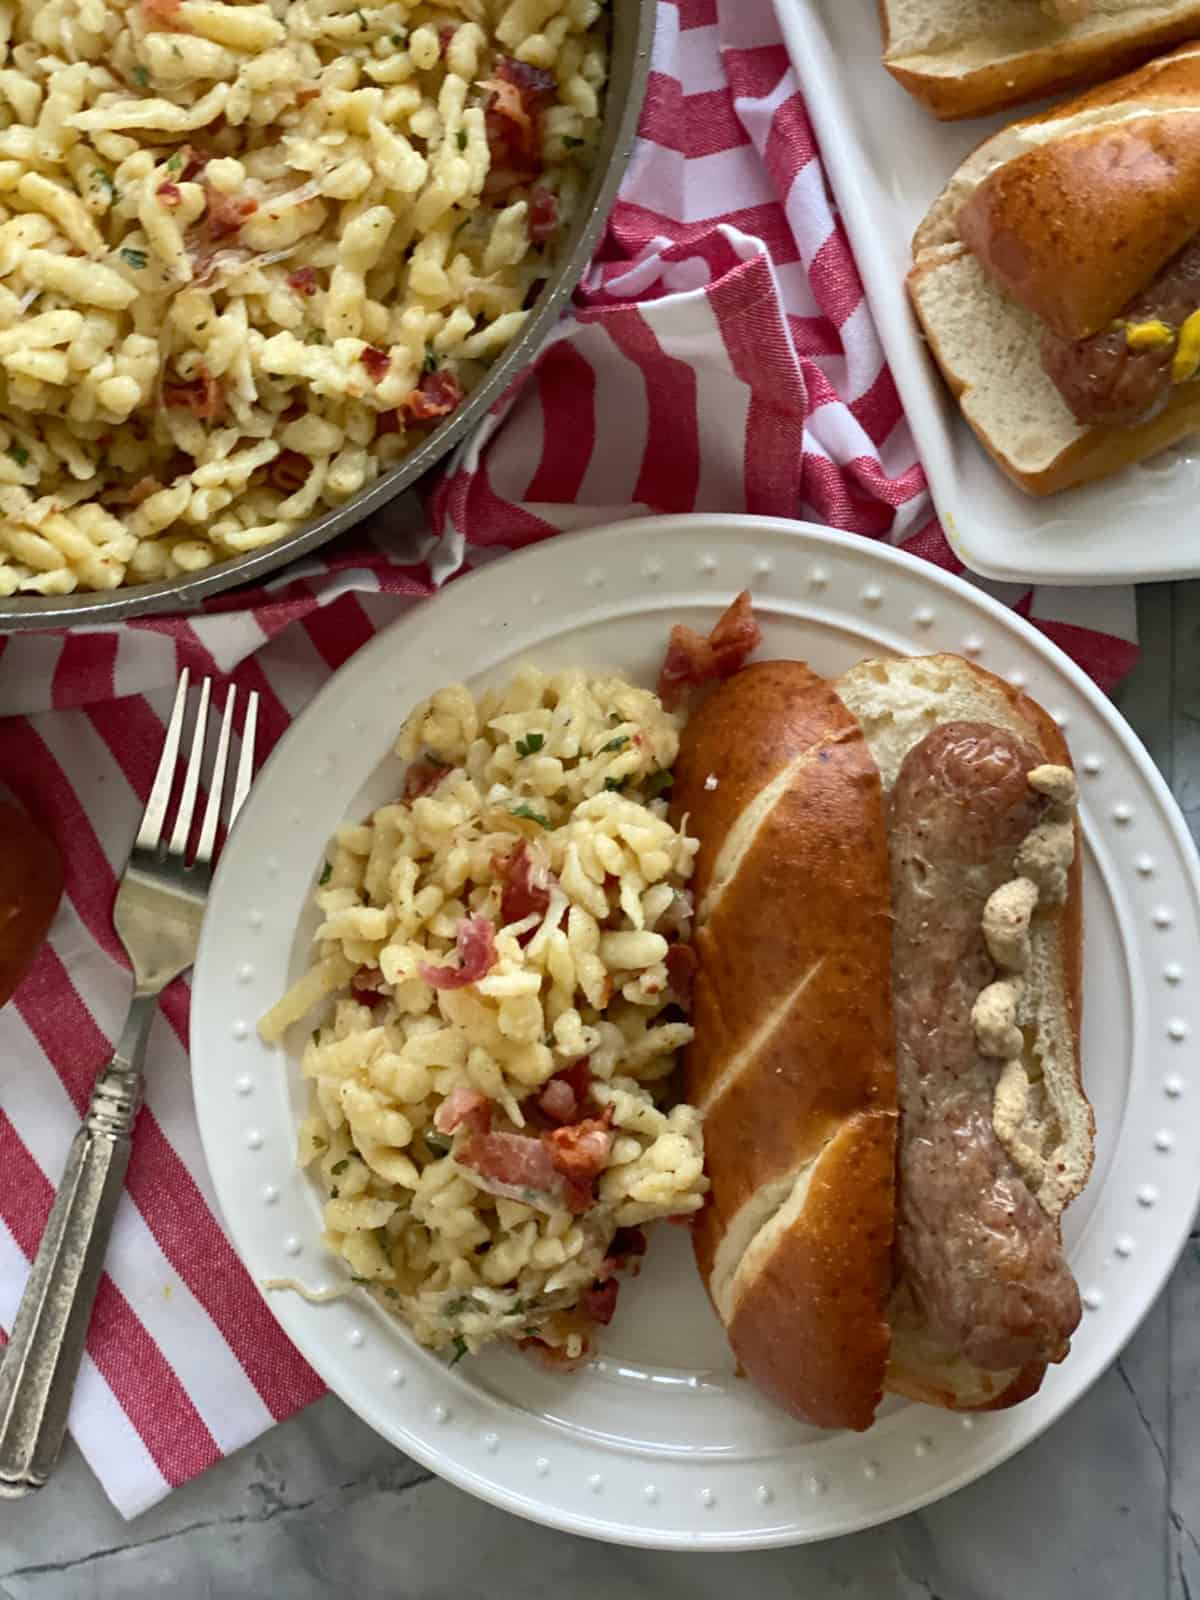 Top view of a white plate filled with spaetzle and a brat on pretzel bun with a red and white striped cloth.